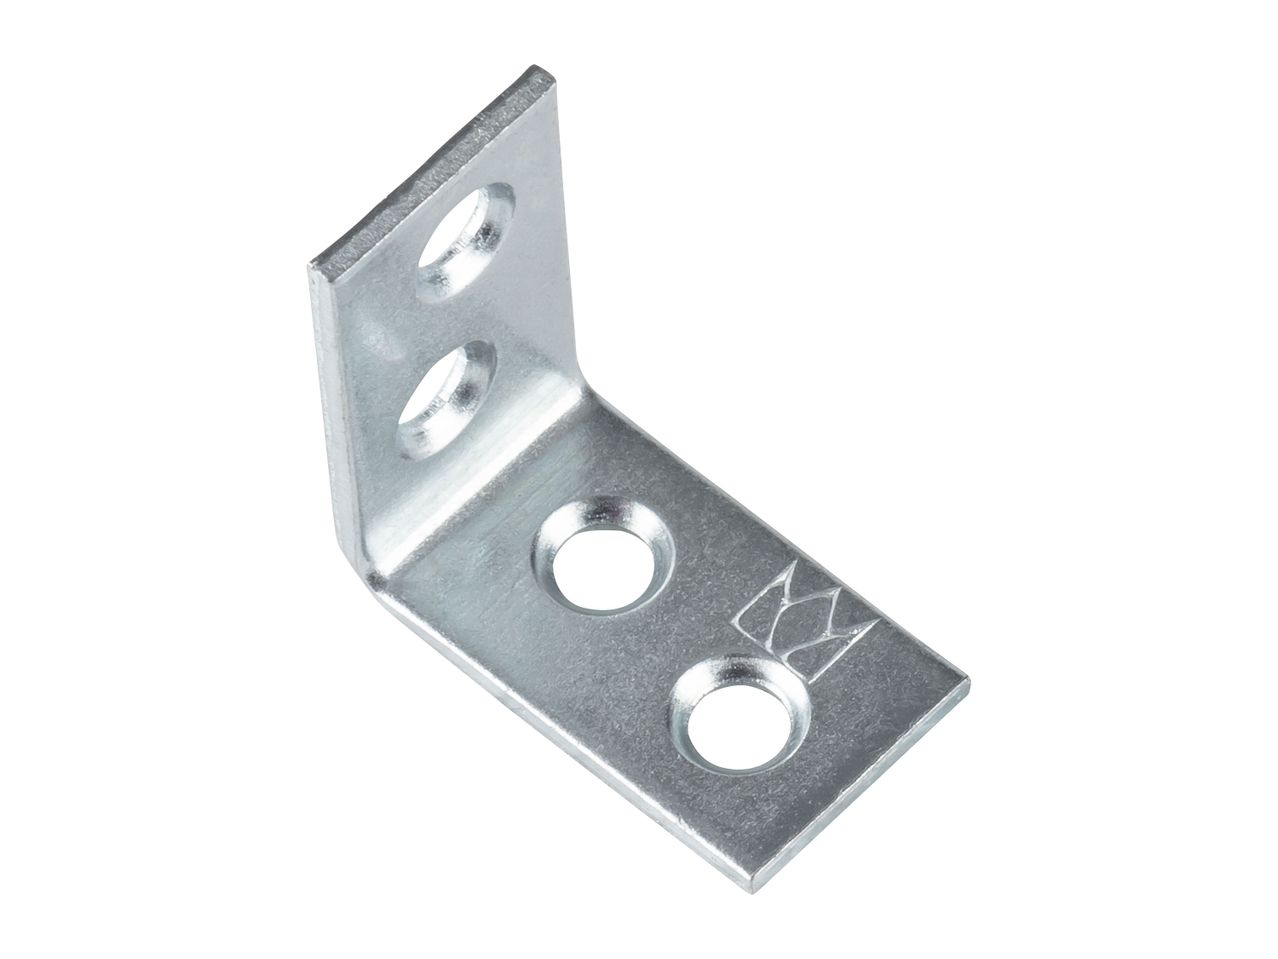 Go to full screen view: PARKSIDE Angle Brackets / Mending Plates / T-Brackets / Corner Braces - Image 6